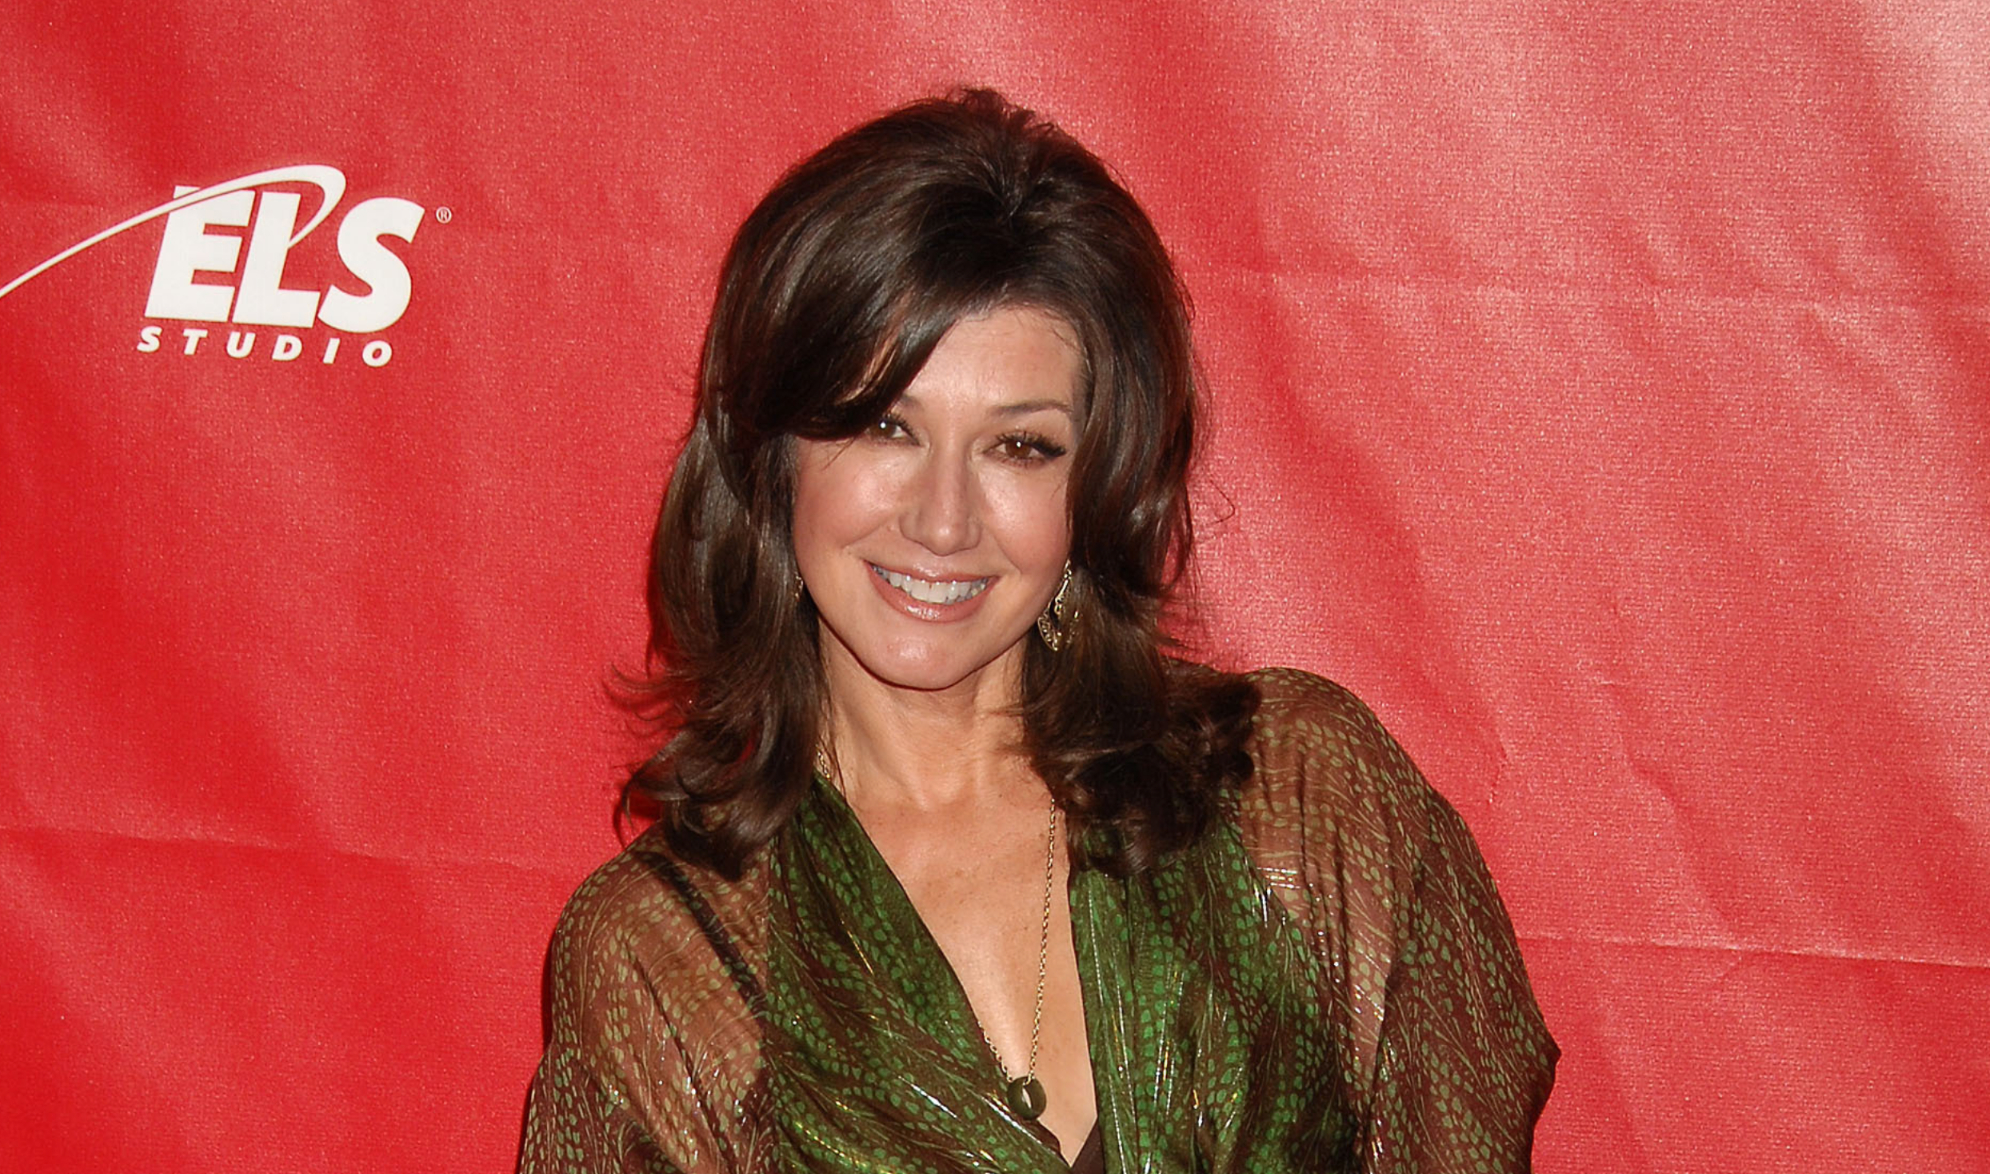 Amy Grant Reveals She Is Still Dealing With Health Issues After Terrifying 2022 Bike Accident | Amy Grant is revealing that she is still dealing with health issues after devastating bike accident she endured in 2022.